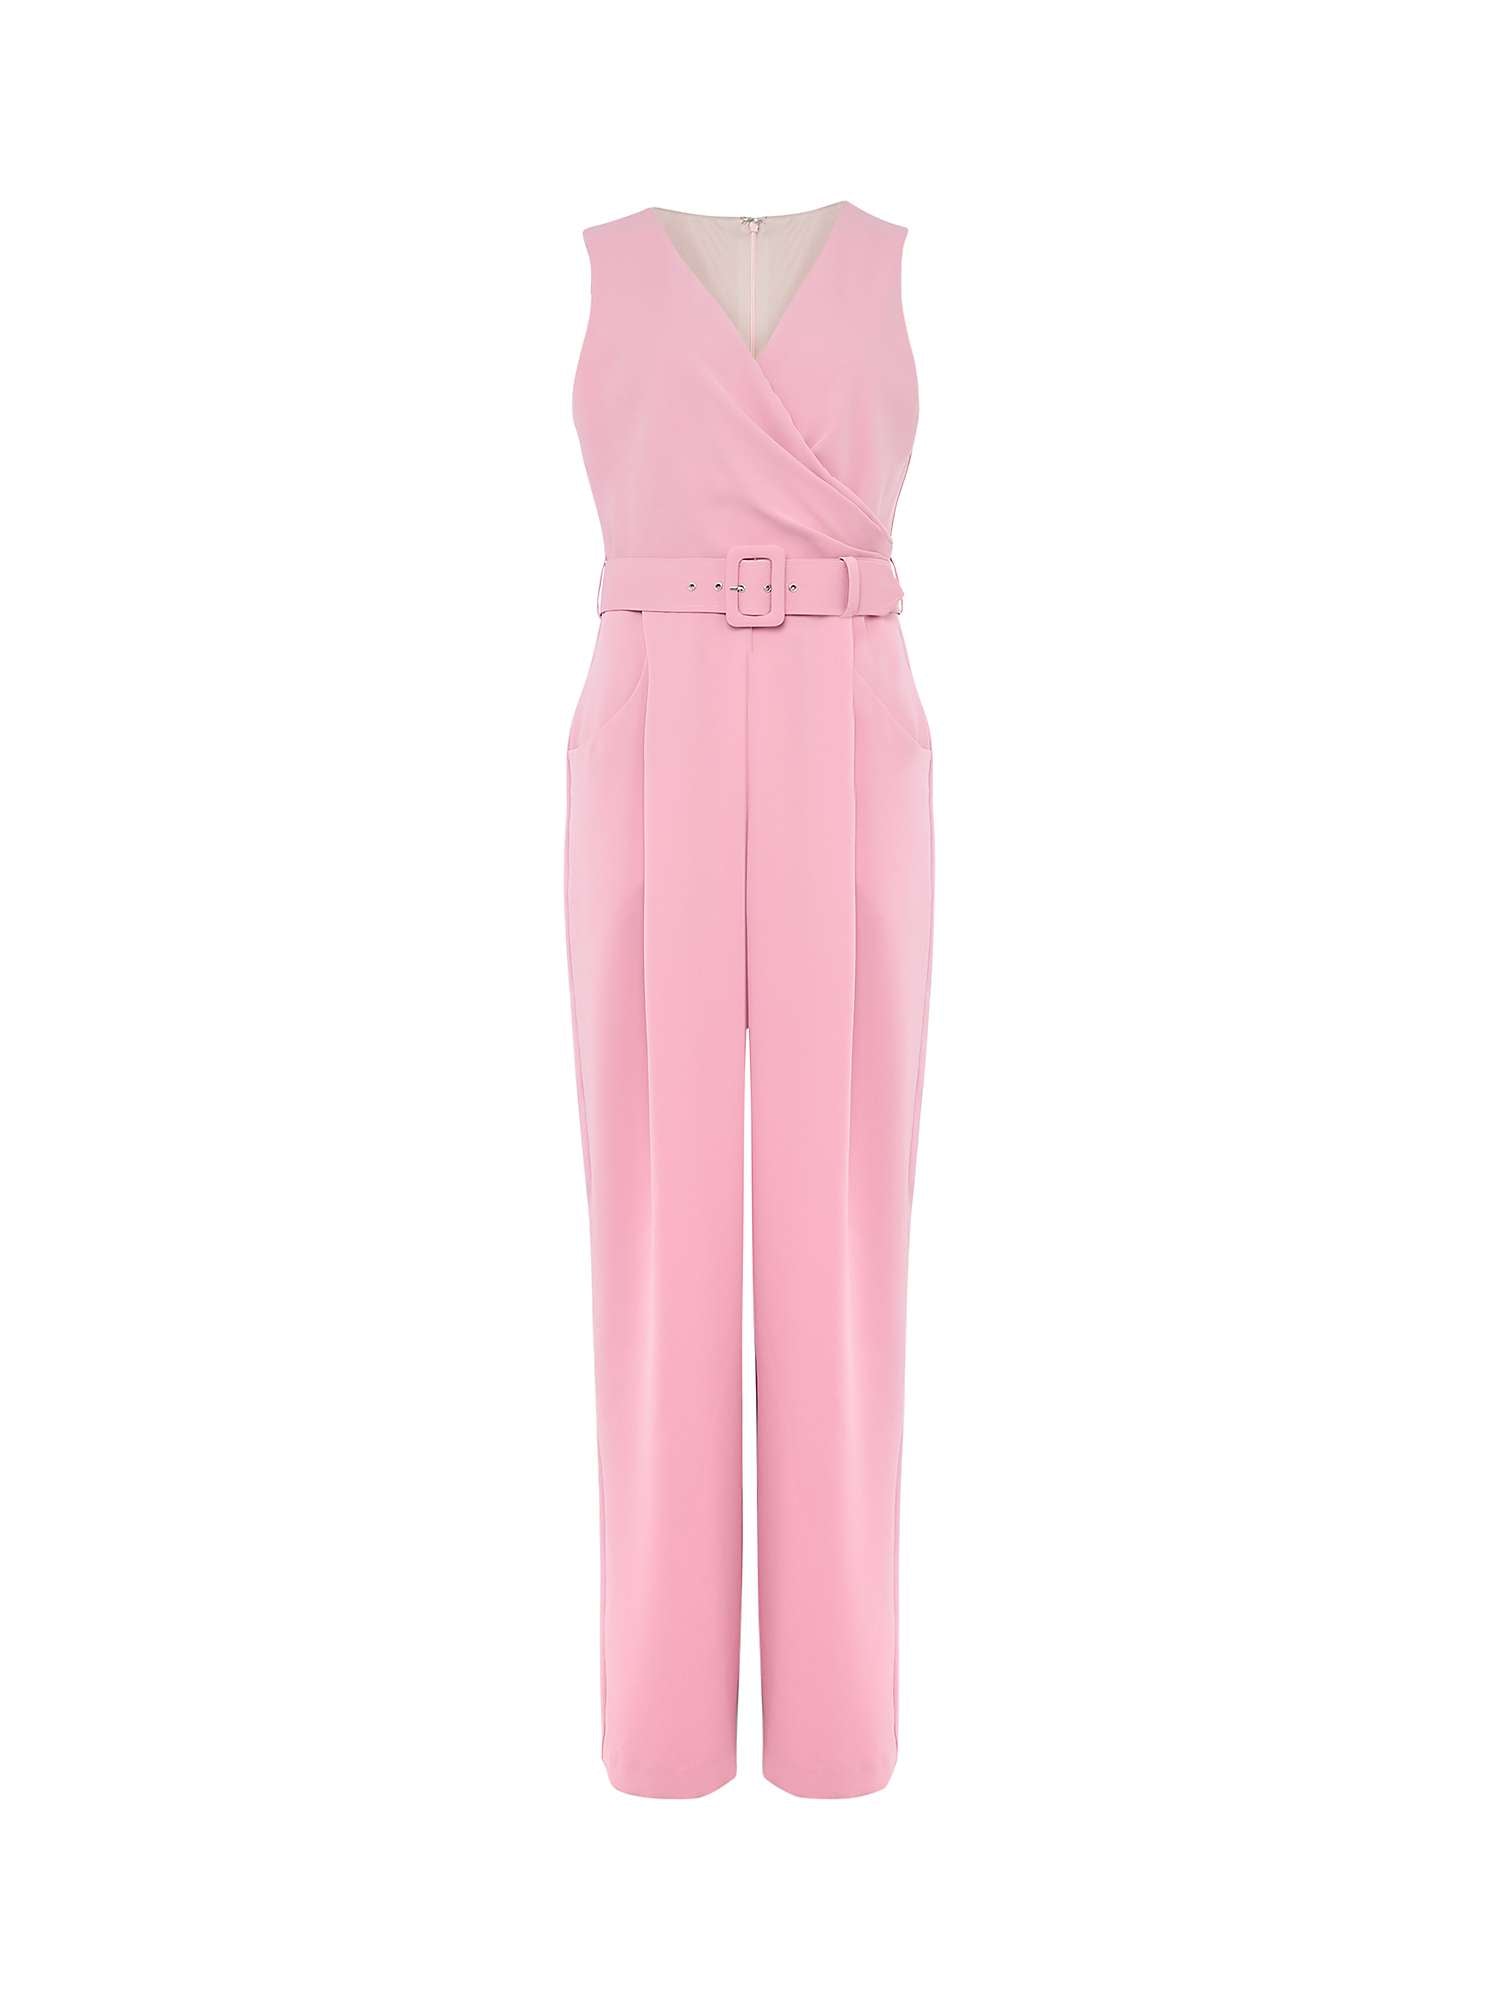 Women's Trendy Leisure Solid Color V-neck Urban Casual Sexy Jumpsuit | Nowena